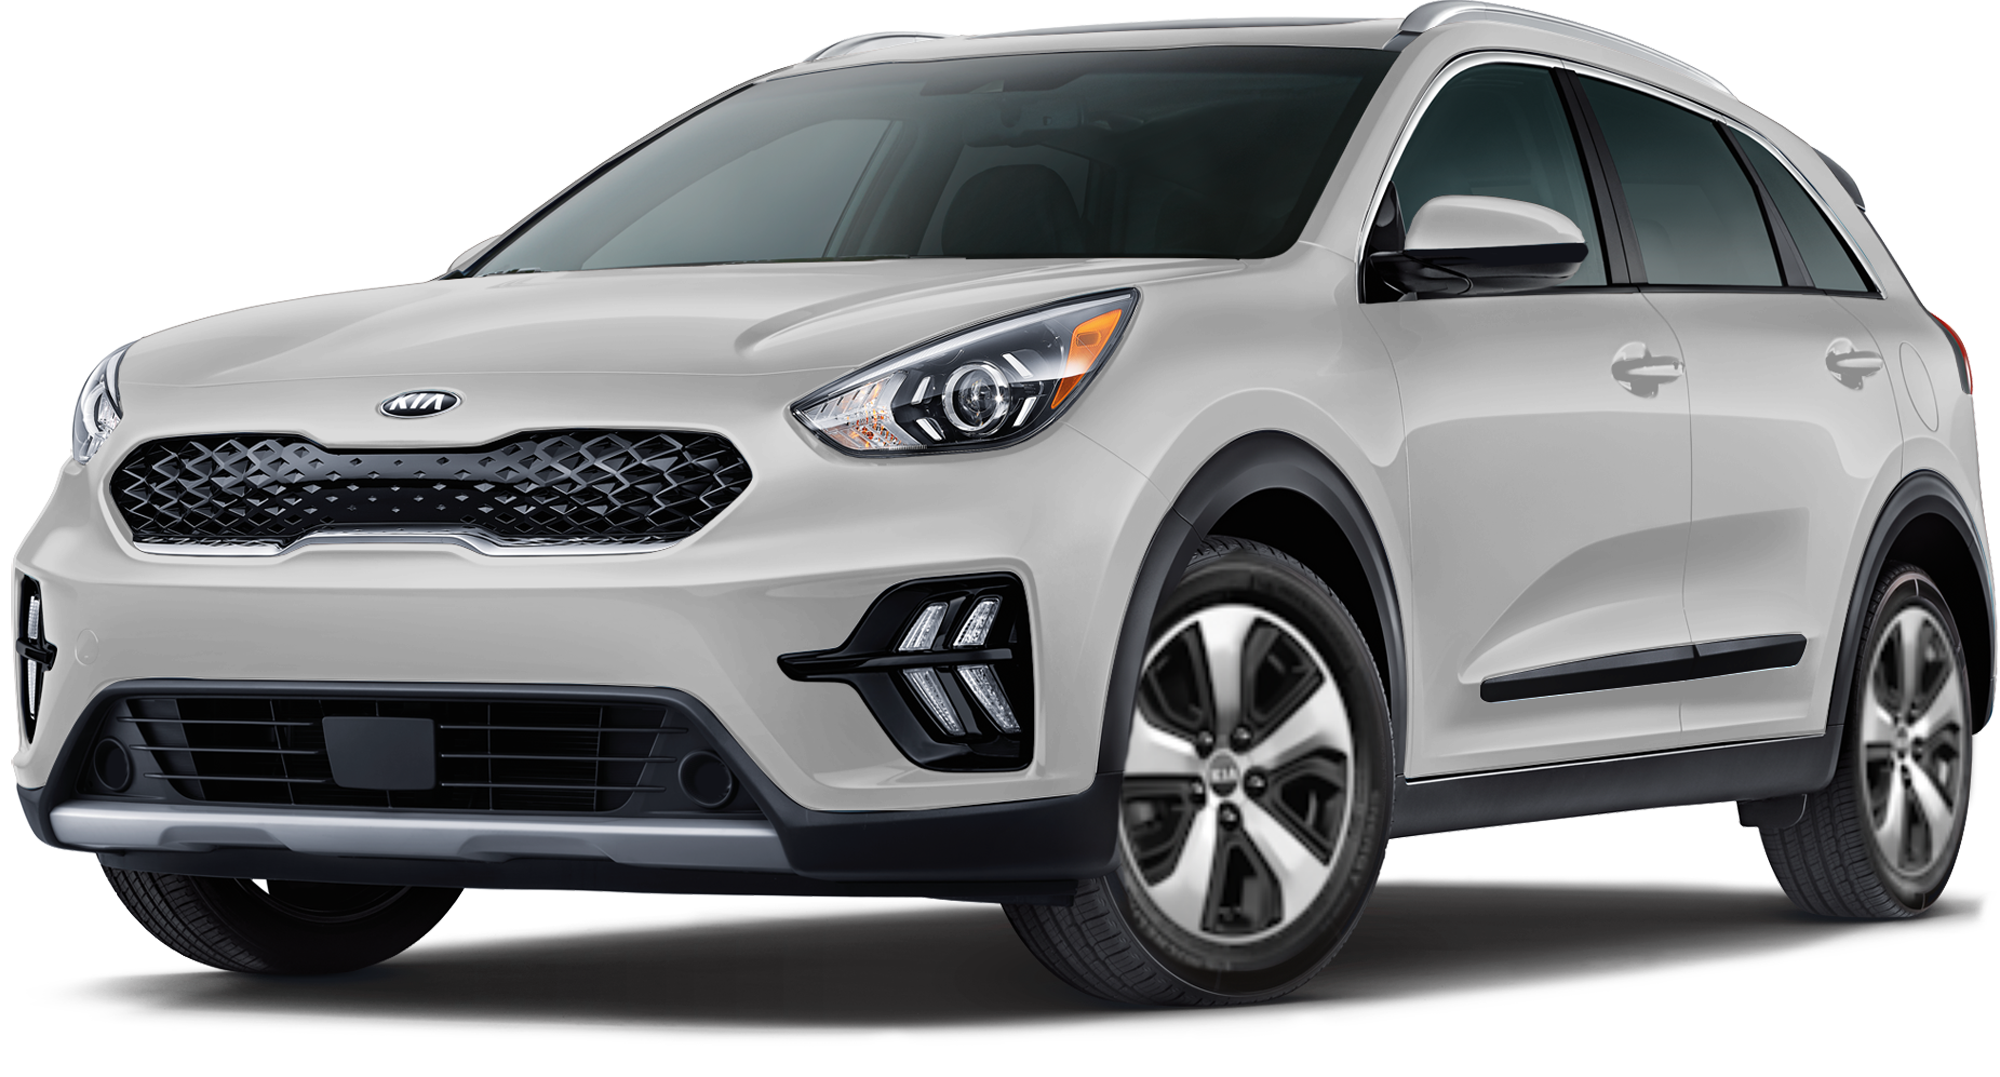 2021-kia-niro-incentives-specials-offers-in-yonkers-ny